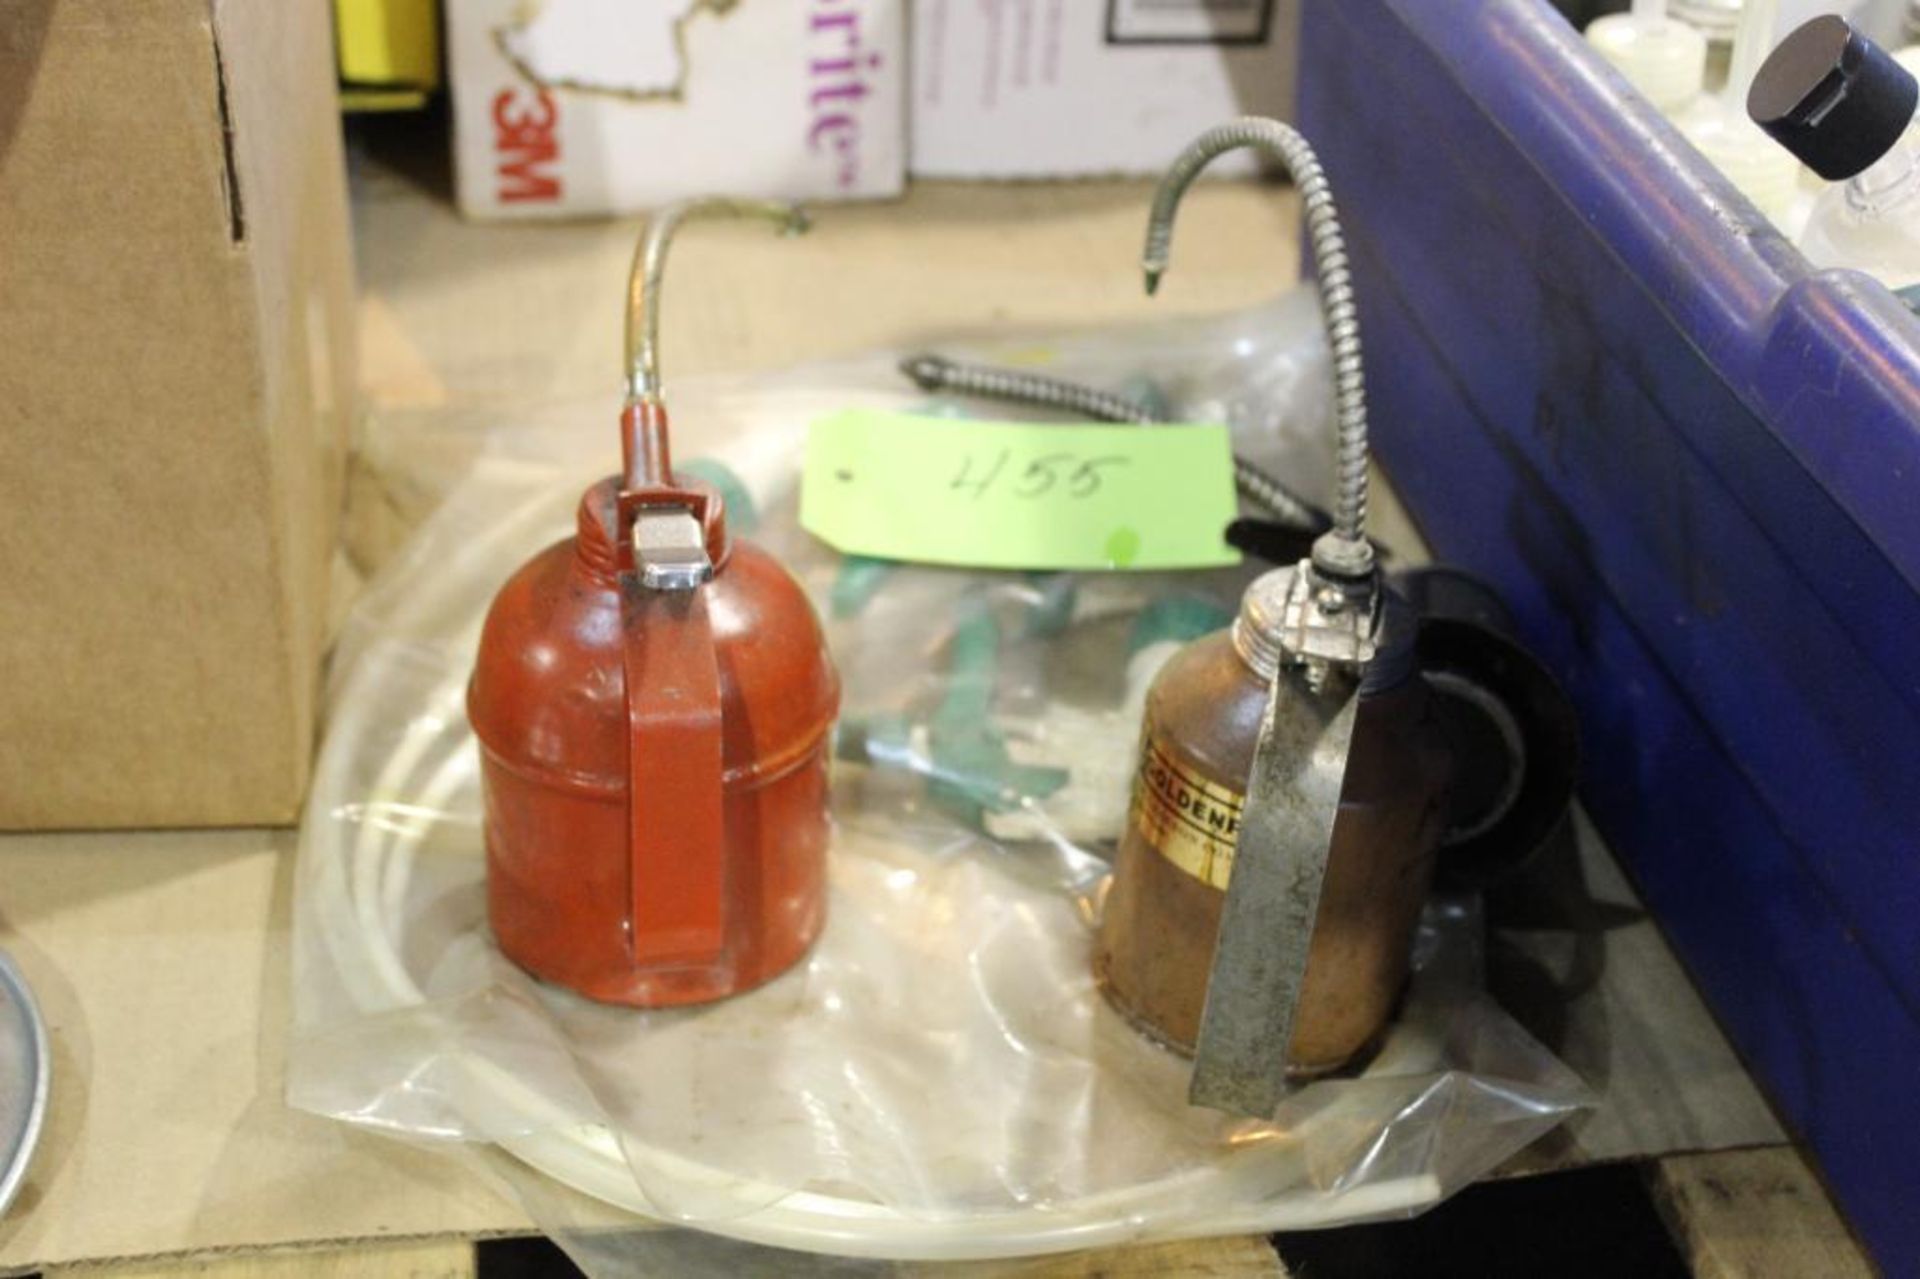 Lot of Assorted Filters, Funnel, Oil Cans and Spray Bottles - Image 6 of 7